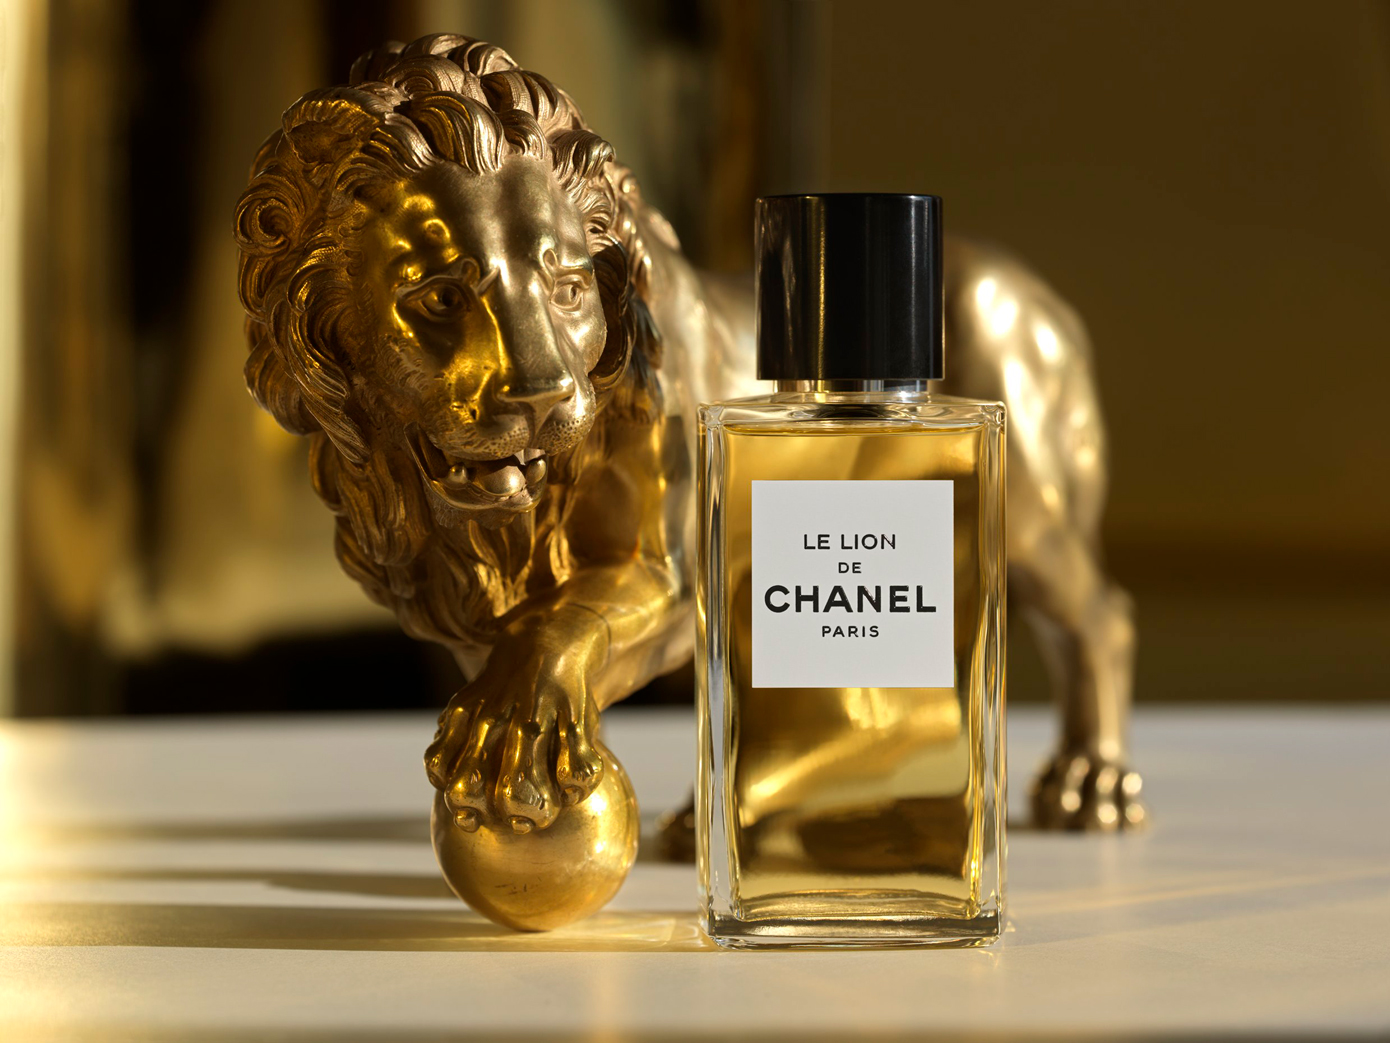 All of Gabrielle Chanel's spirit in a new fragrance